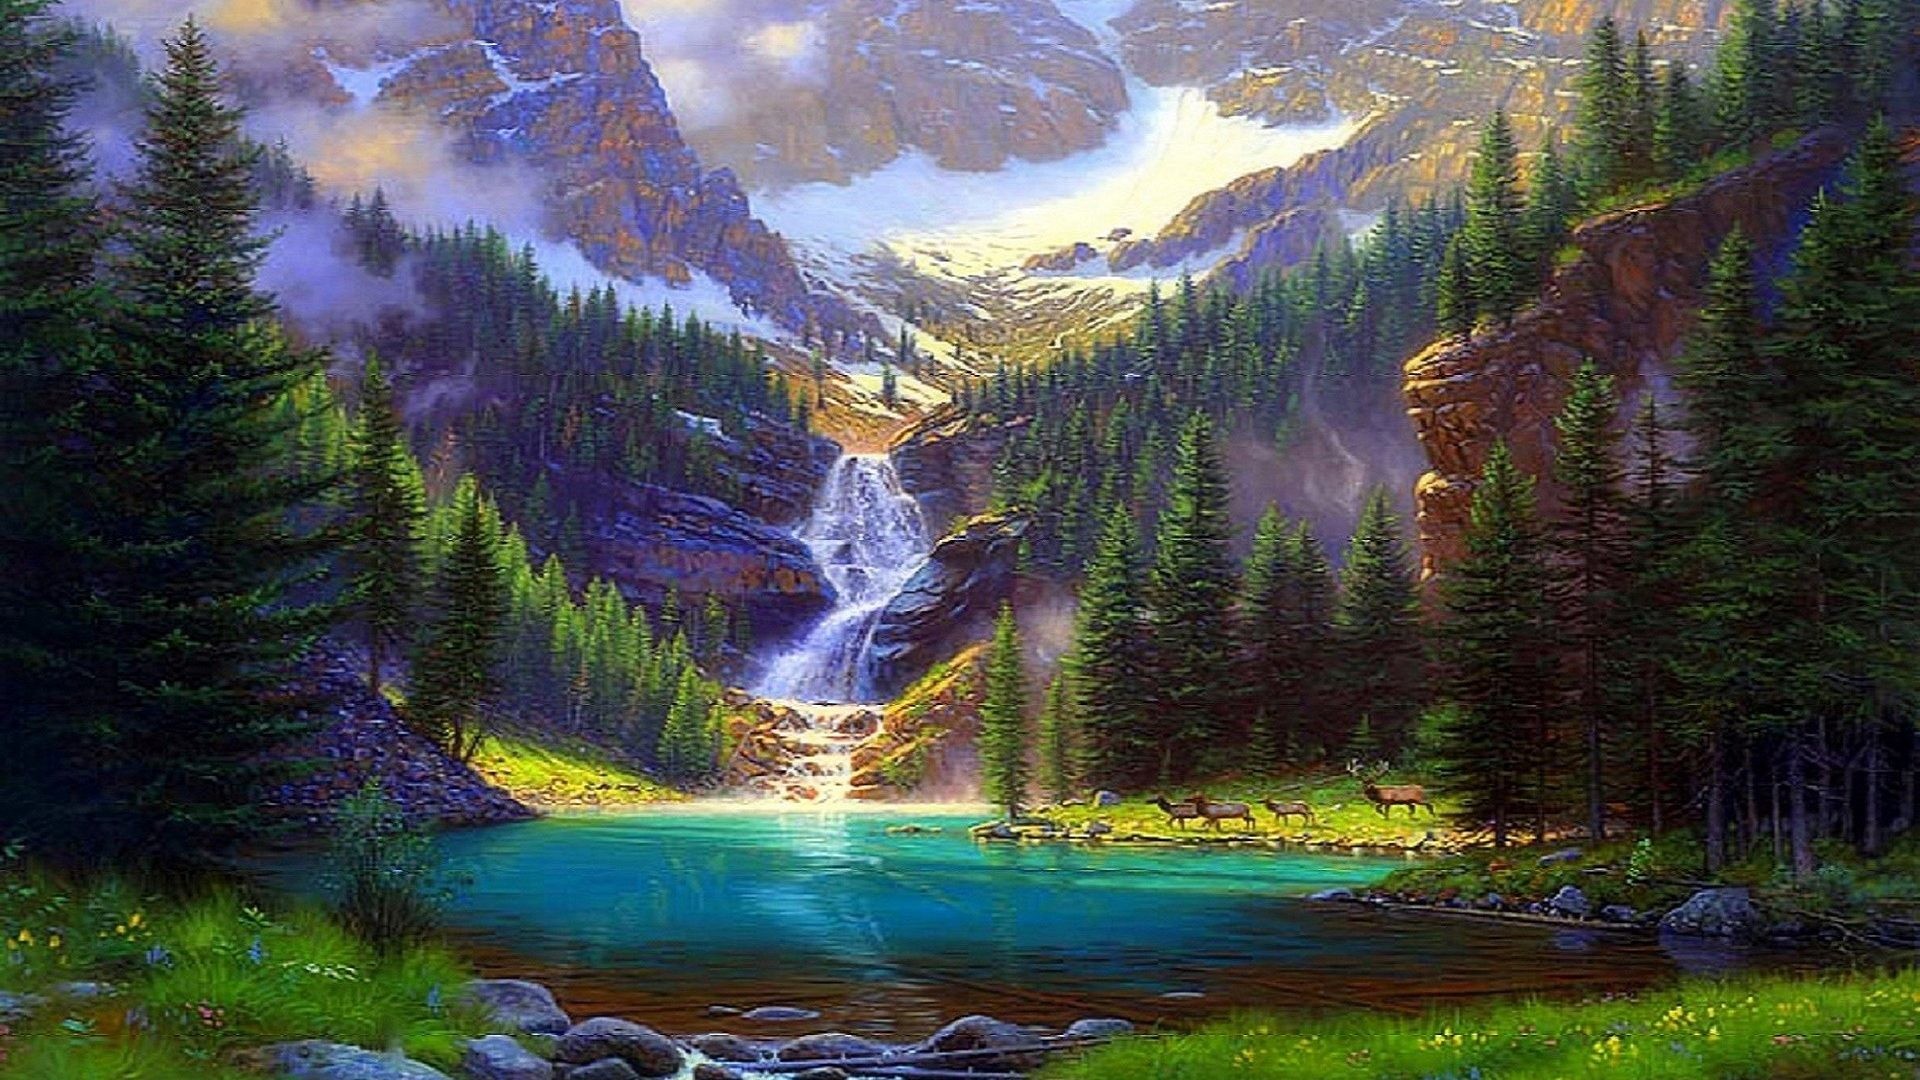 1920x1080 ... Creative View Waterfalls Nature Panoramic Loaded Forests Mountains  Solitude Dreams Pre Perfect Best Wildlife Attractions Lake Tahoe Hd  Wallpapers